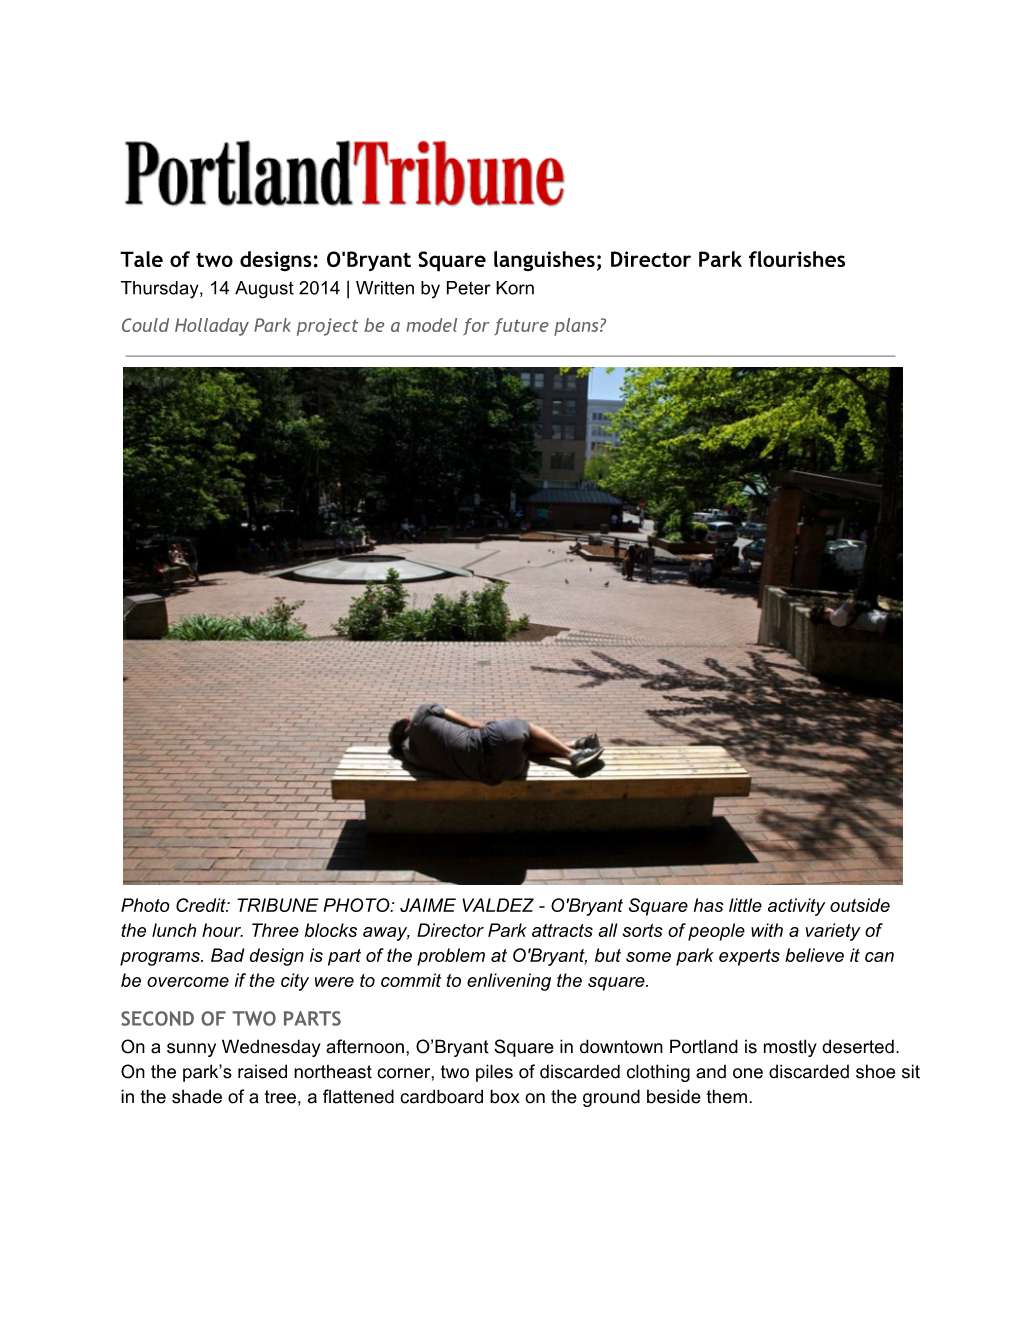 Tale of Two Designs: O'bryant Square Languishes; Director Park Flourishes Thursday, 14 August 2014 | Written by Peter Korn